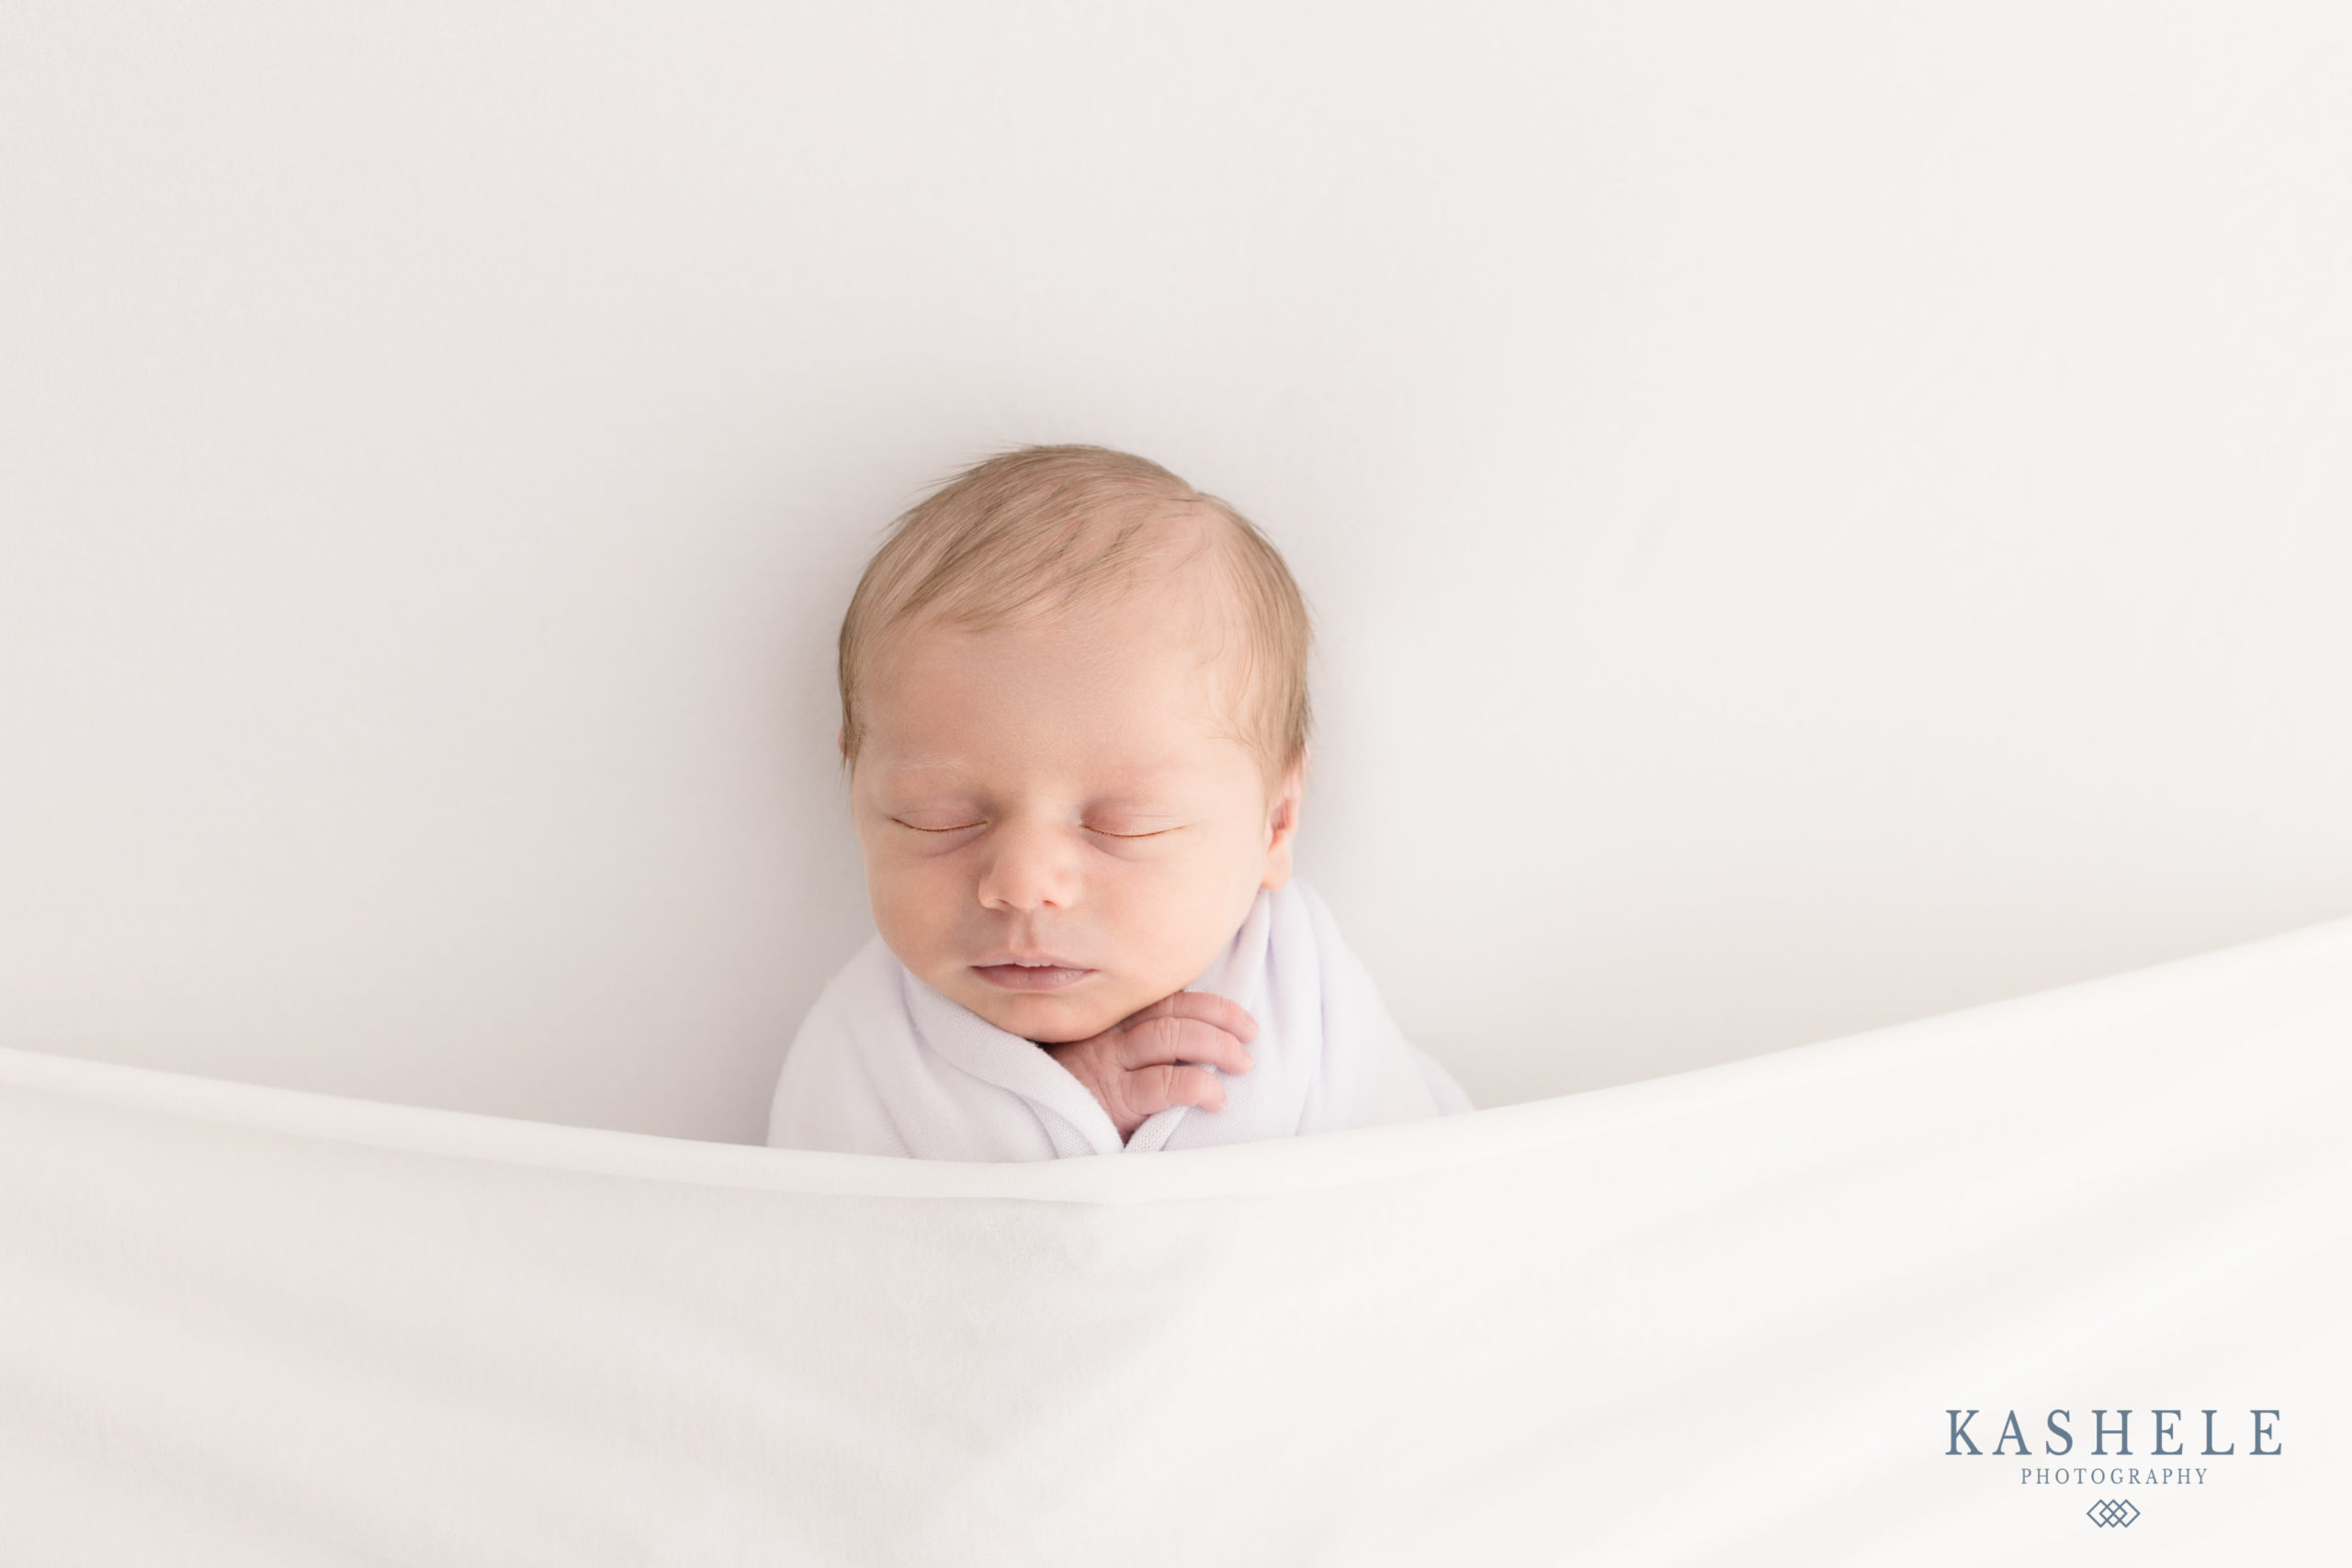 Everyday Objects You Can Use as Props for Better Baby Photography